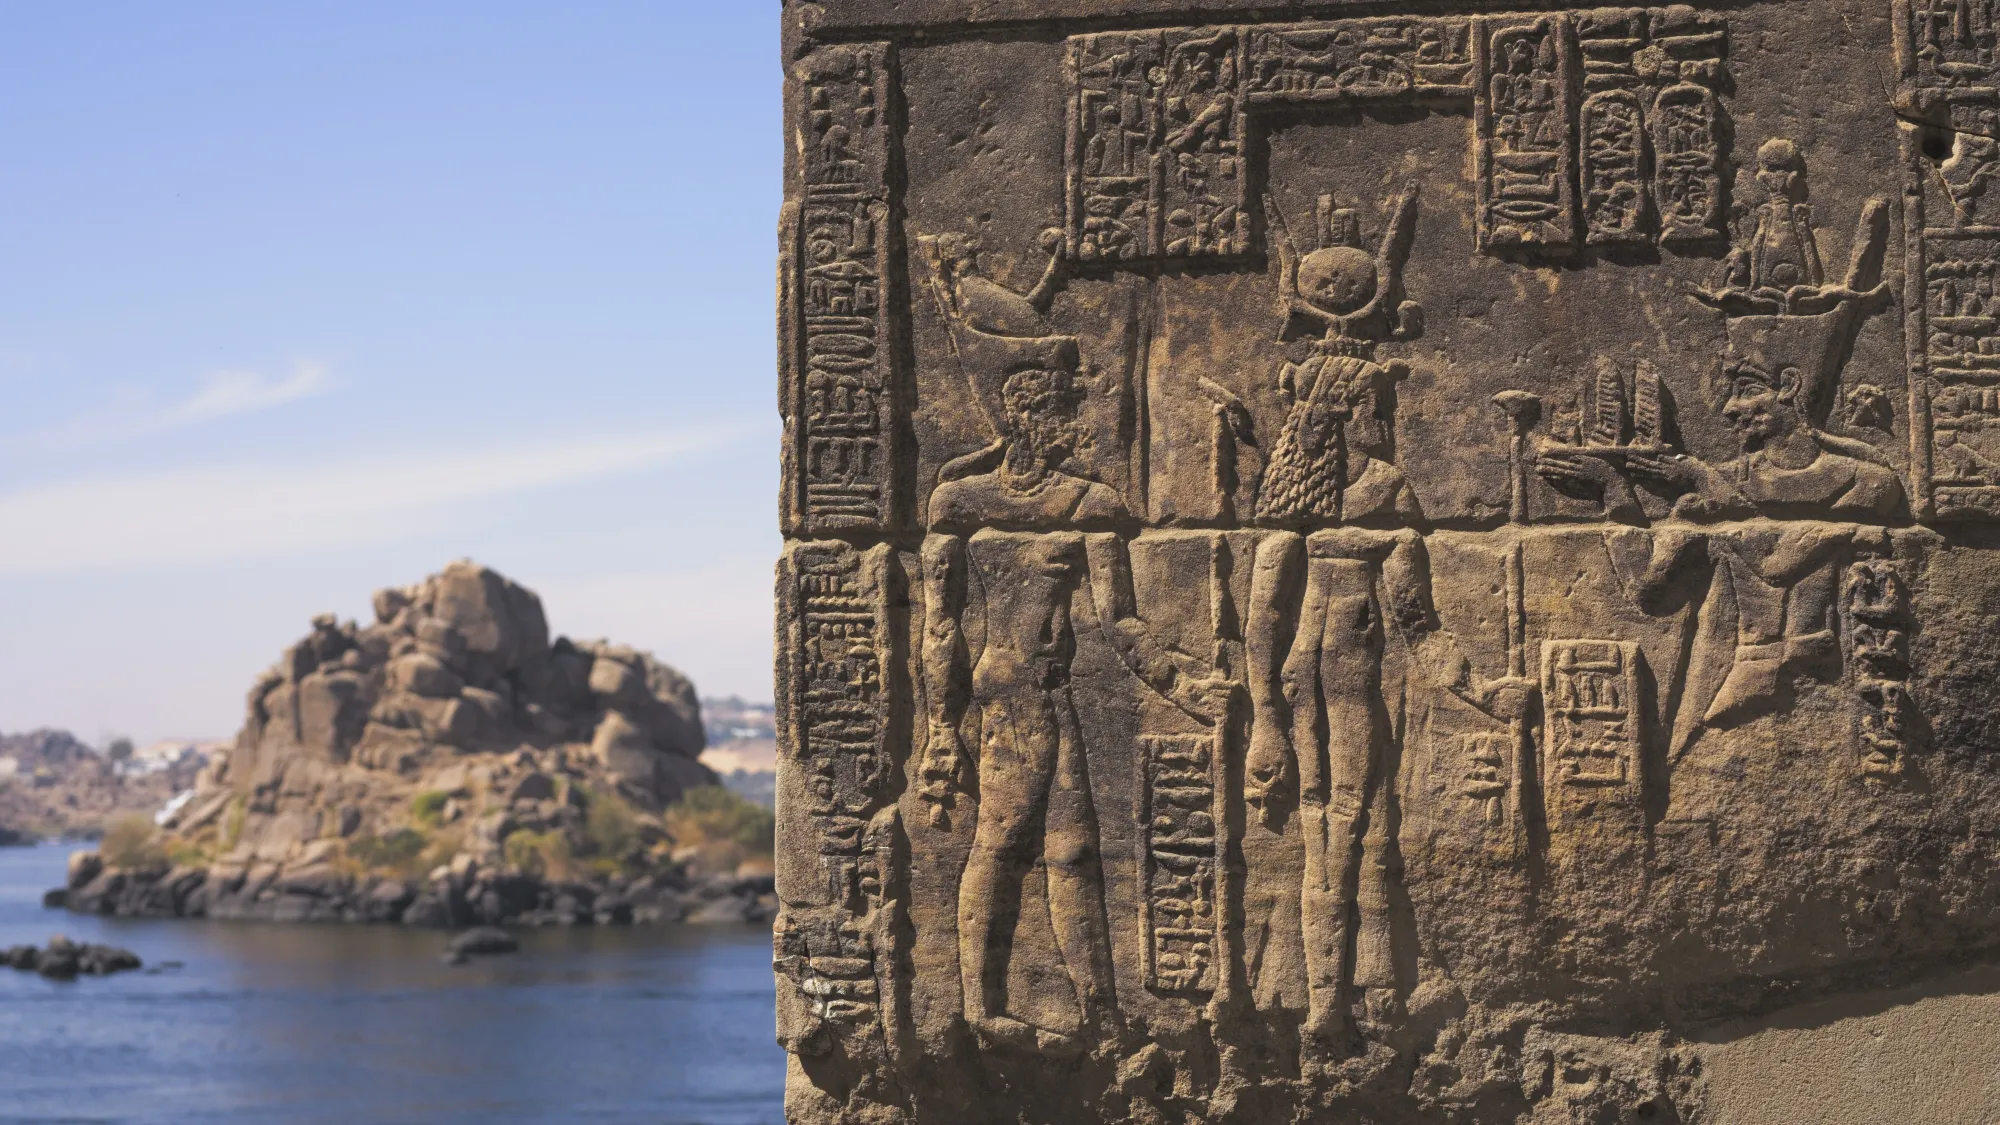 Close-up of reliefs and hieroglyphics overlooking the river